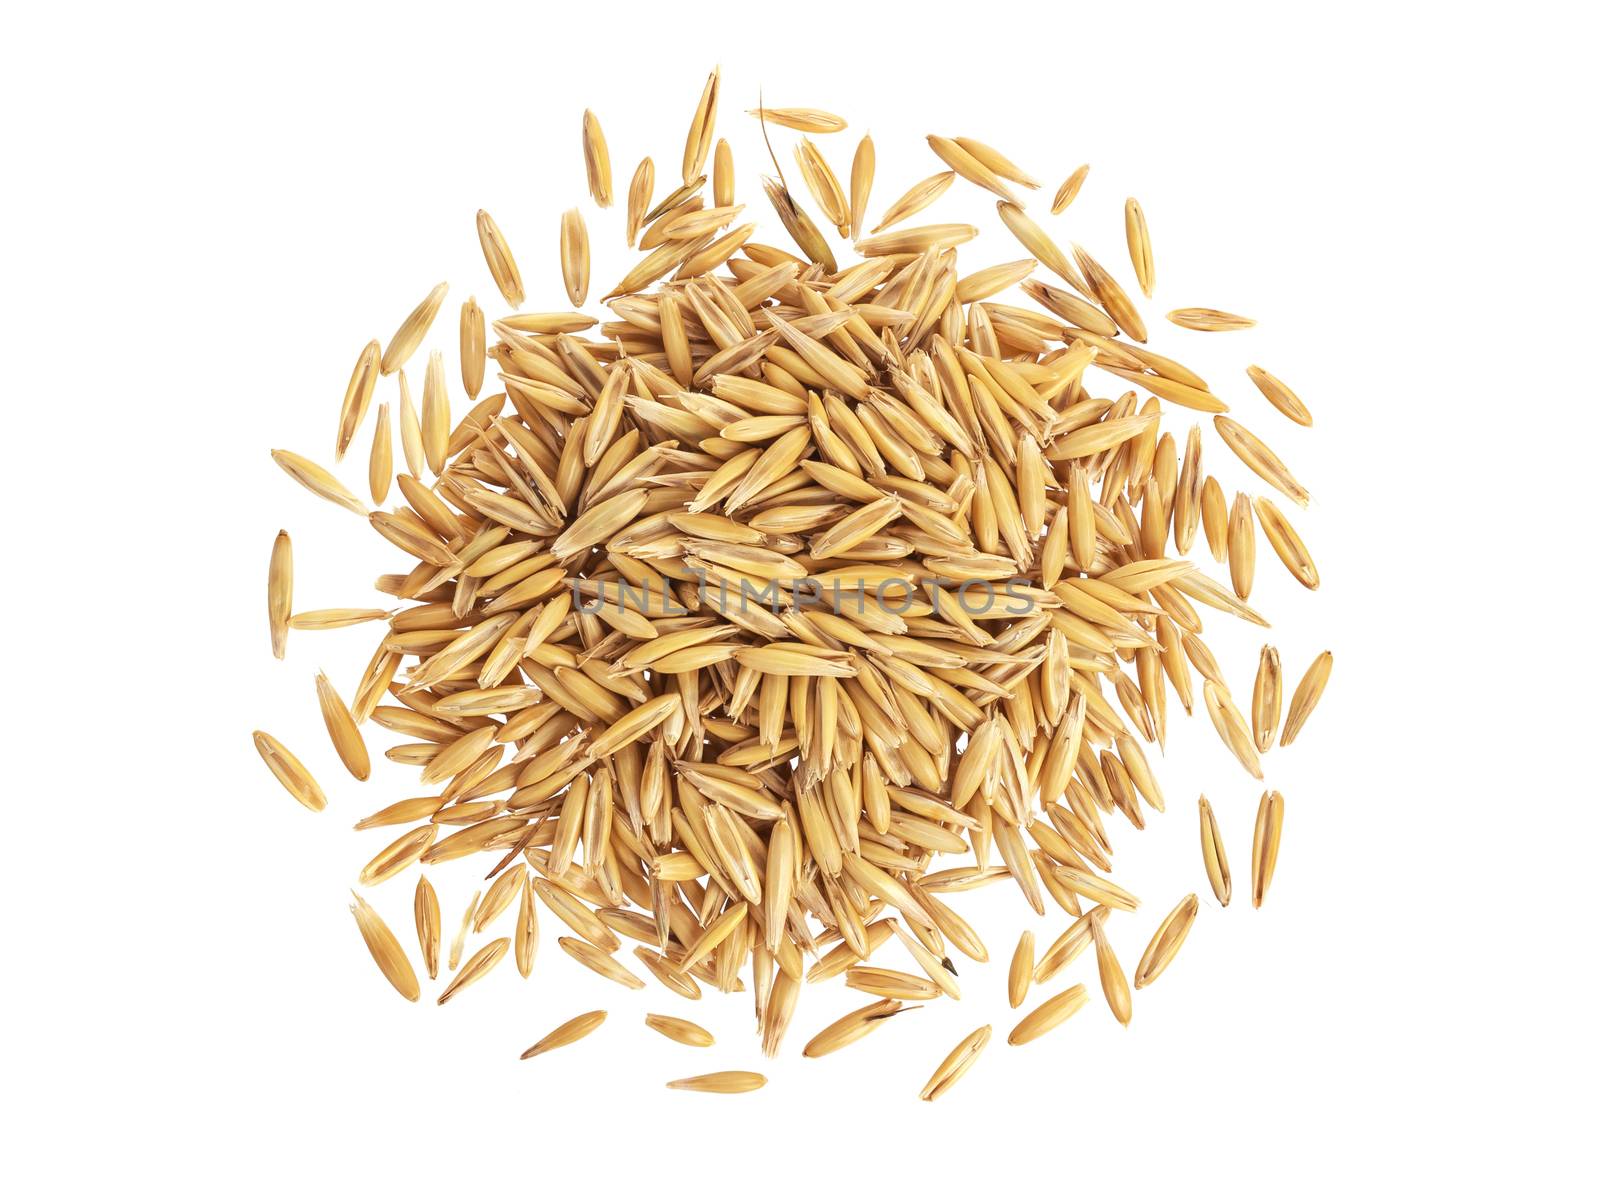 Pile of oat grains isolated on white background with clipping path. Top view